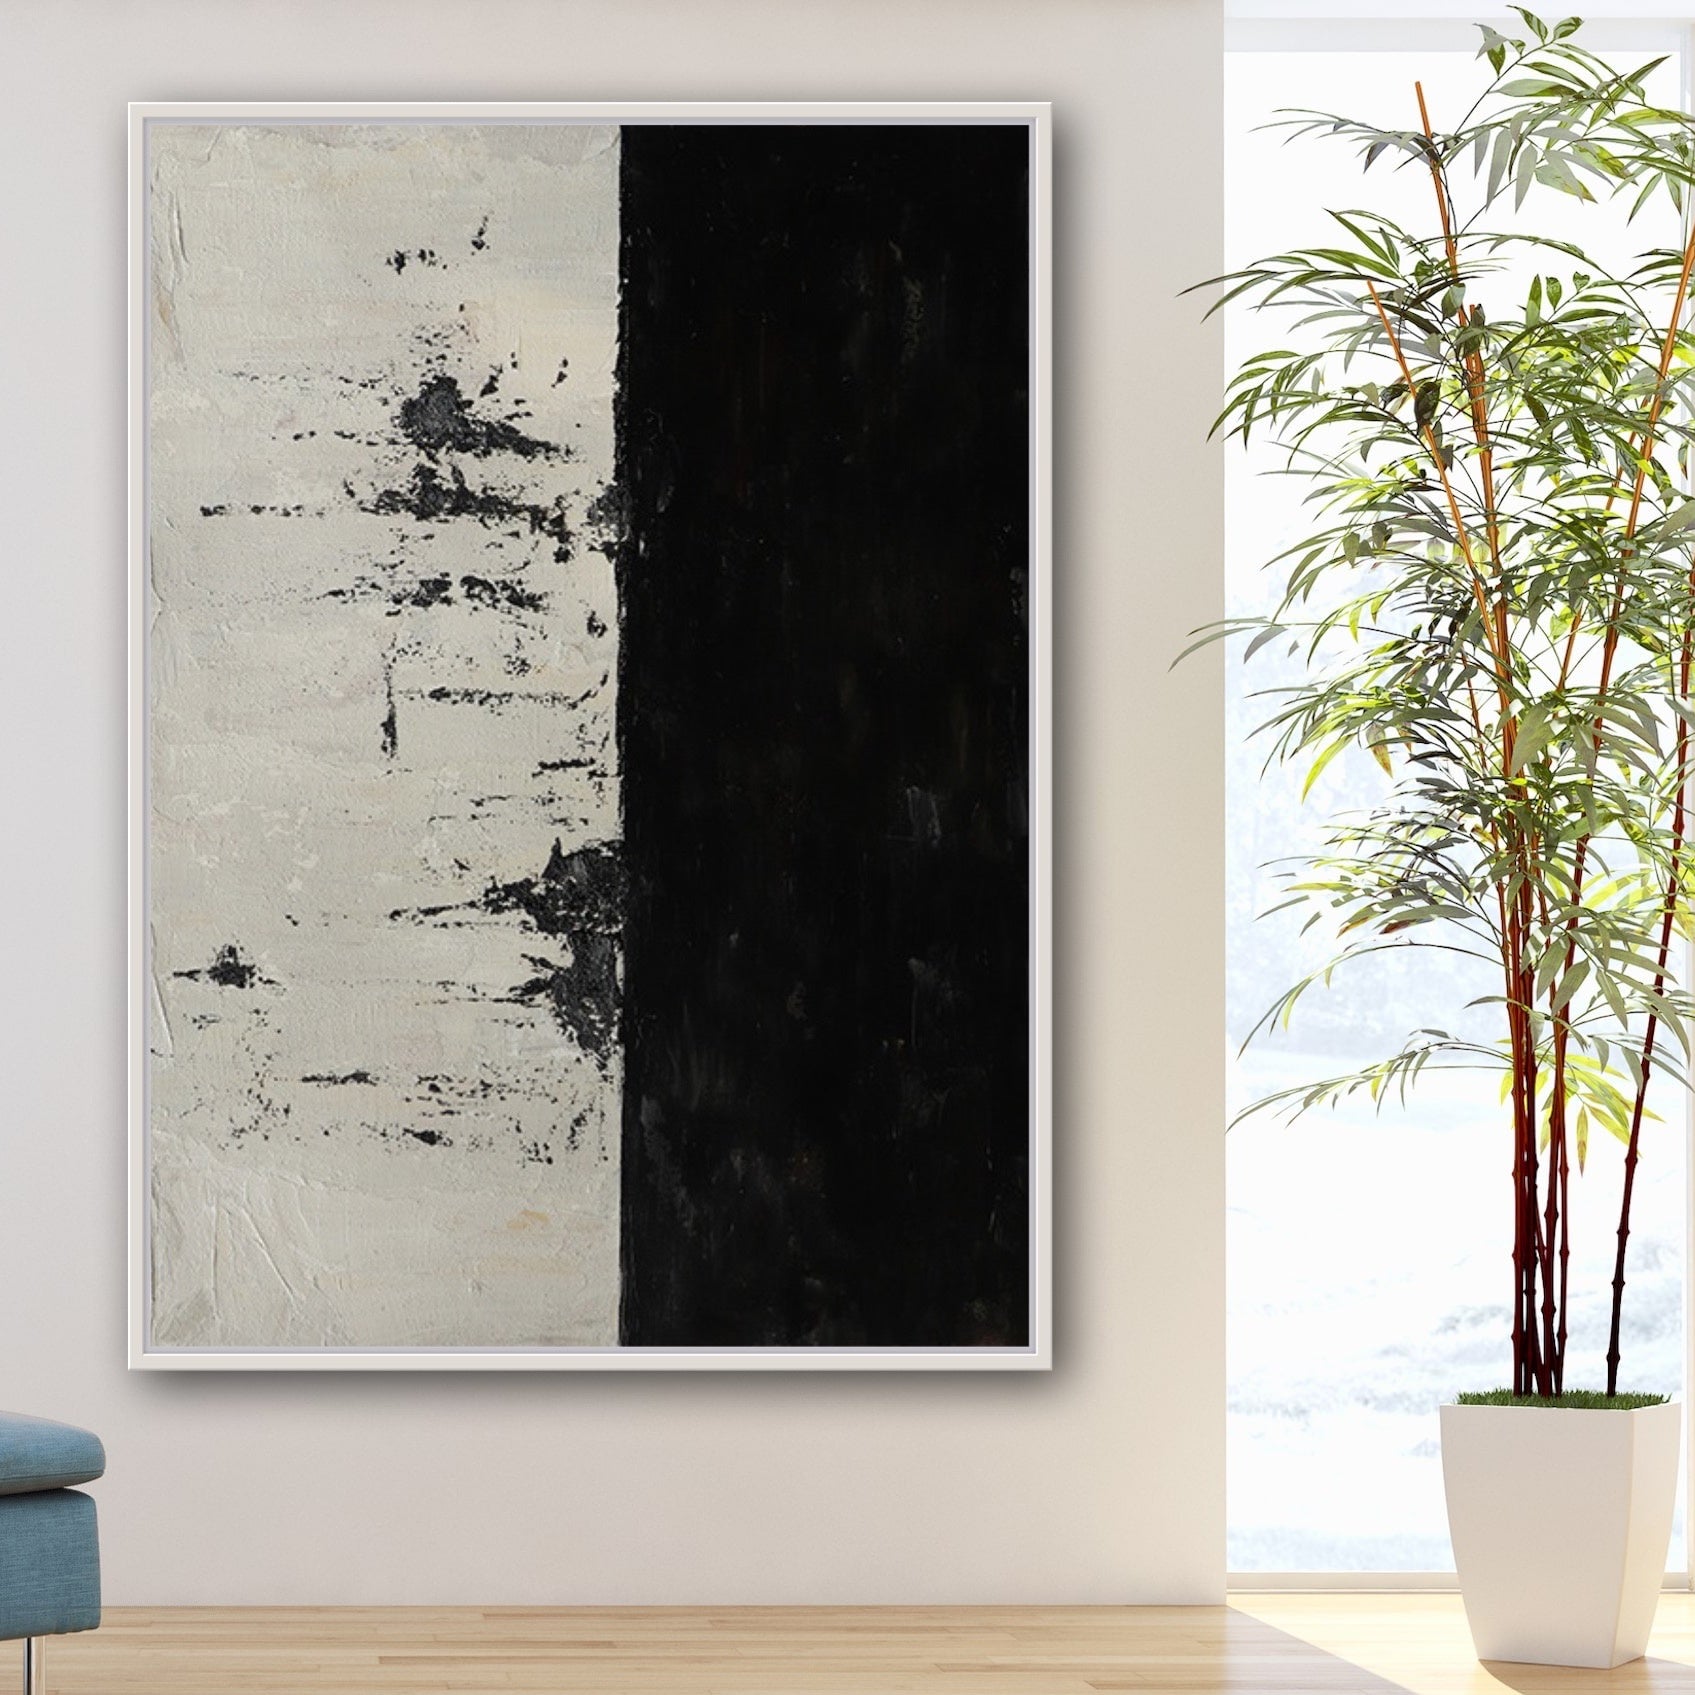 Ovedue, Black And Silver / 60x90cm